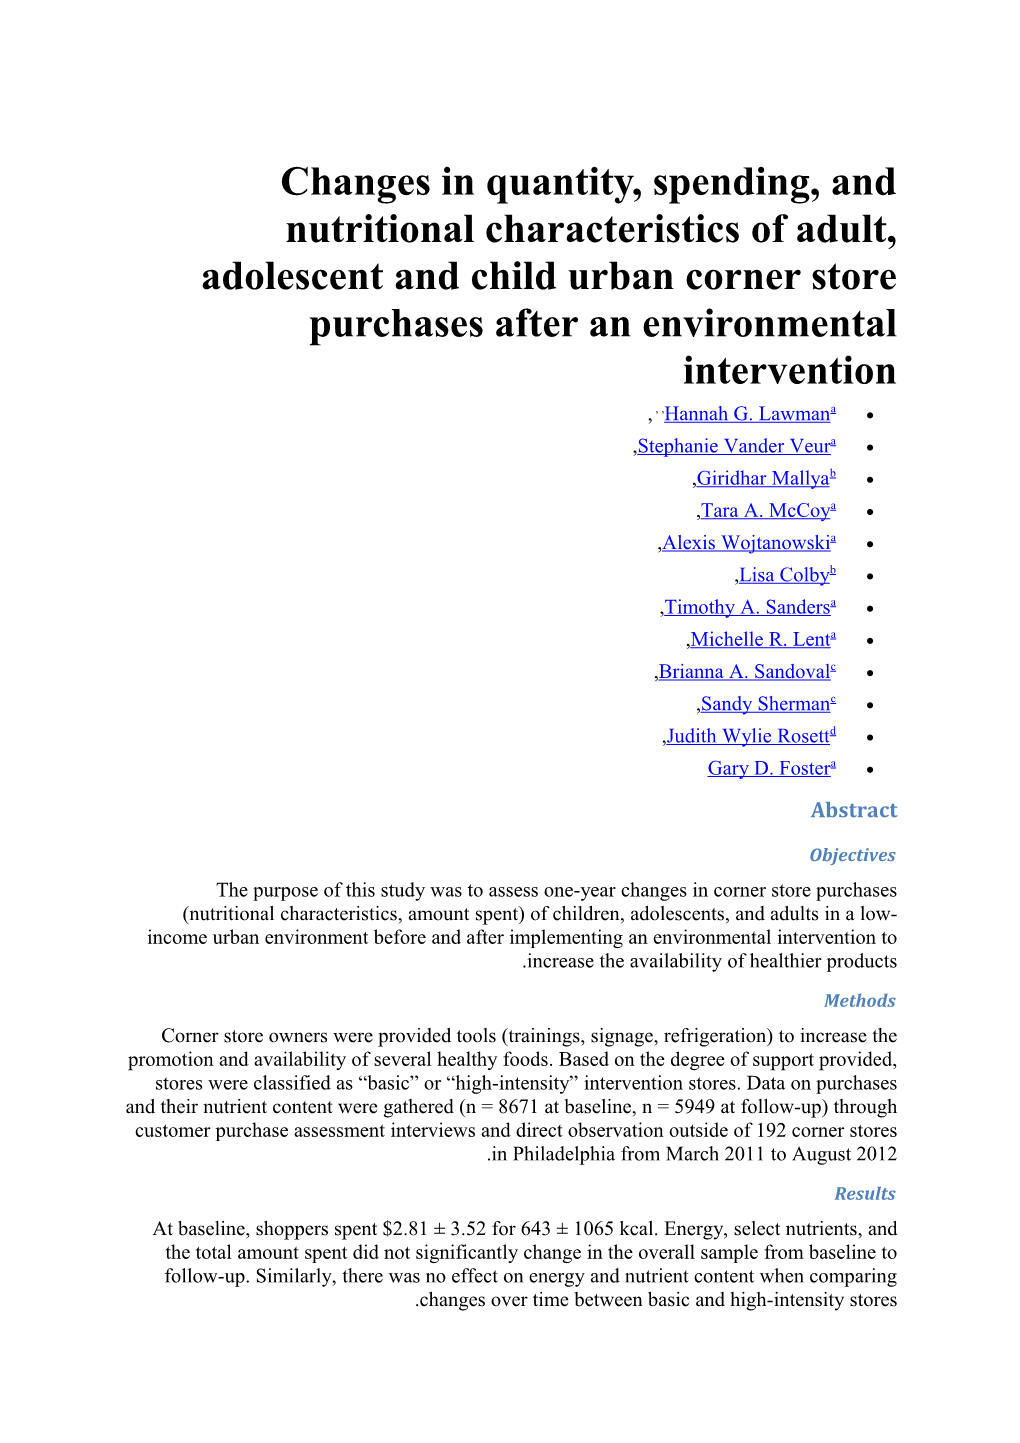 Changes in Quantity, Spending, and Nutritional Characteristics of Adult, Adolescent And